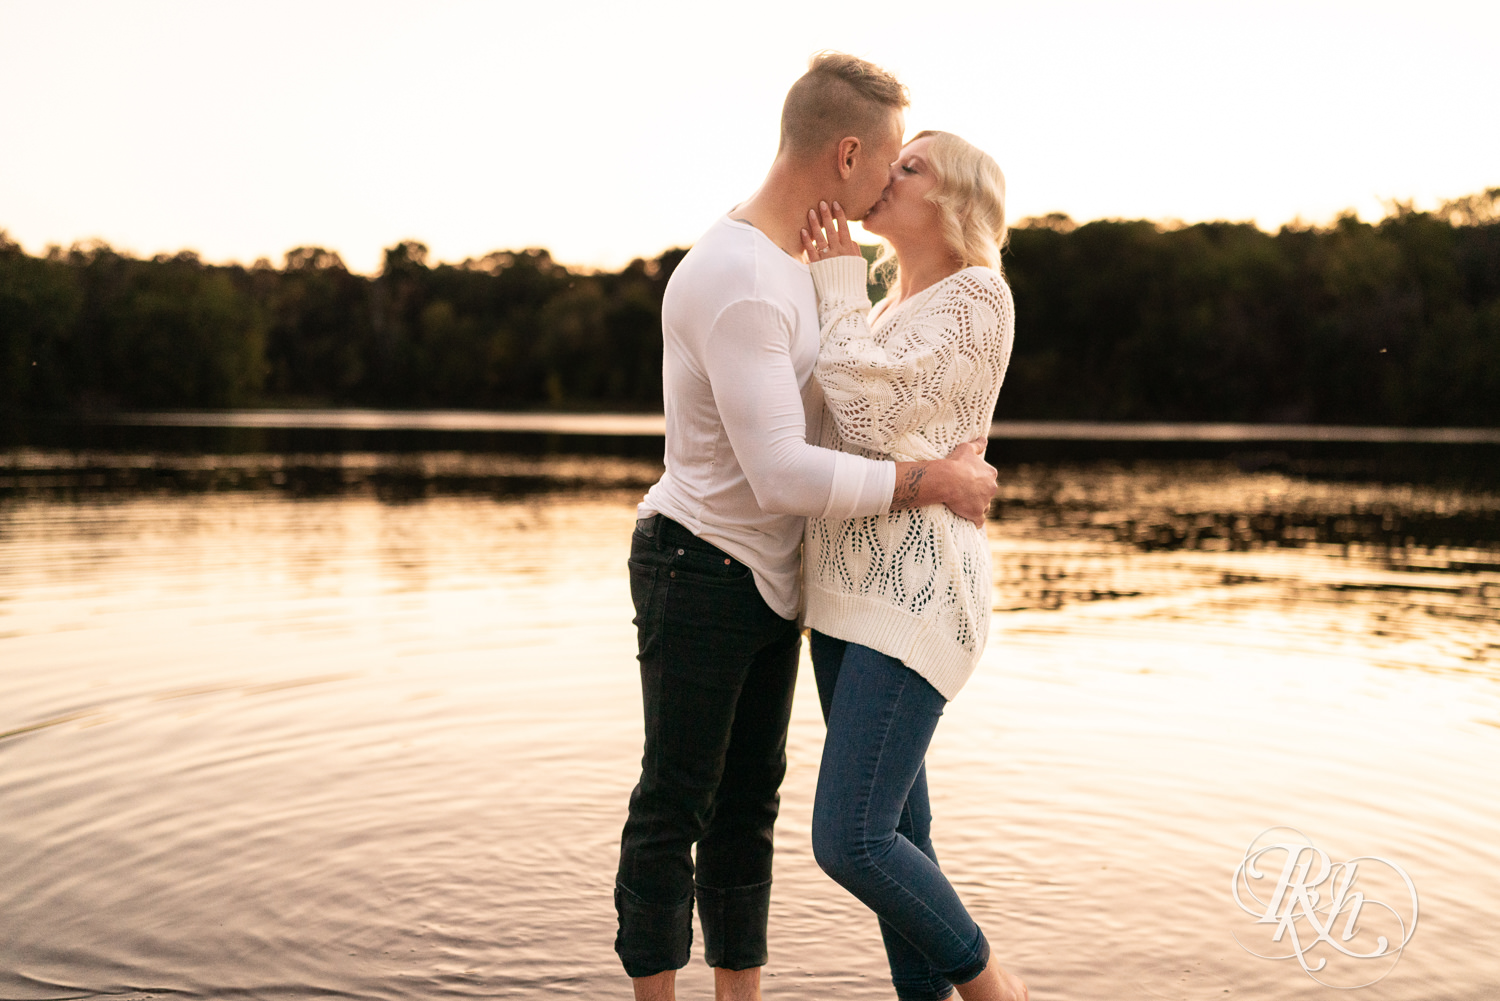 Blond woman and man in white shirts and jeans kiss in the lake at Lebanon Hills Regional Park in Eagan, Minnesota.